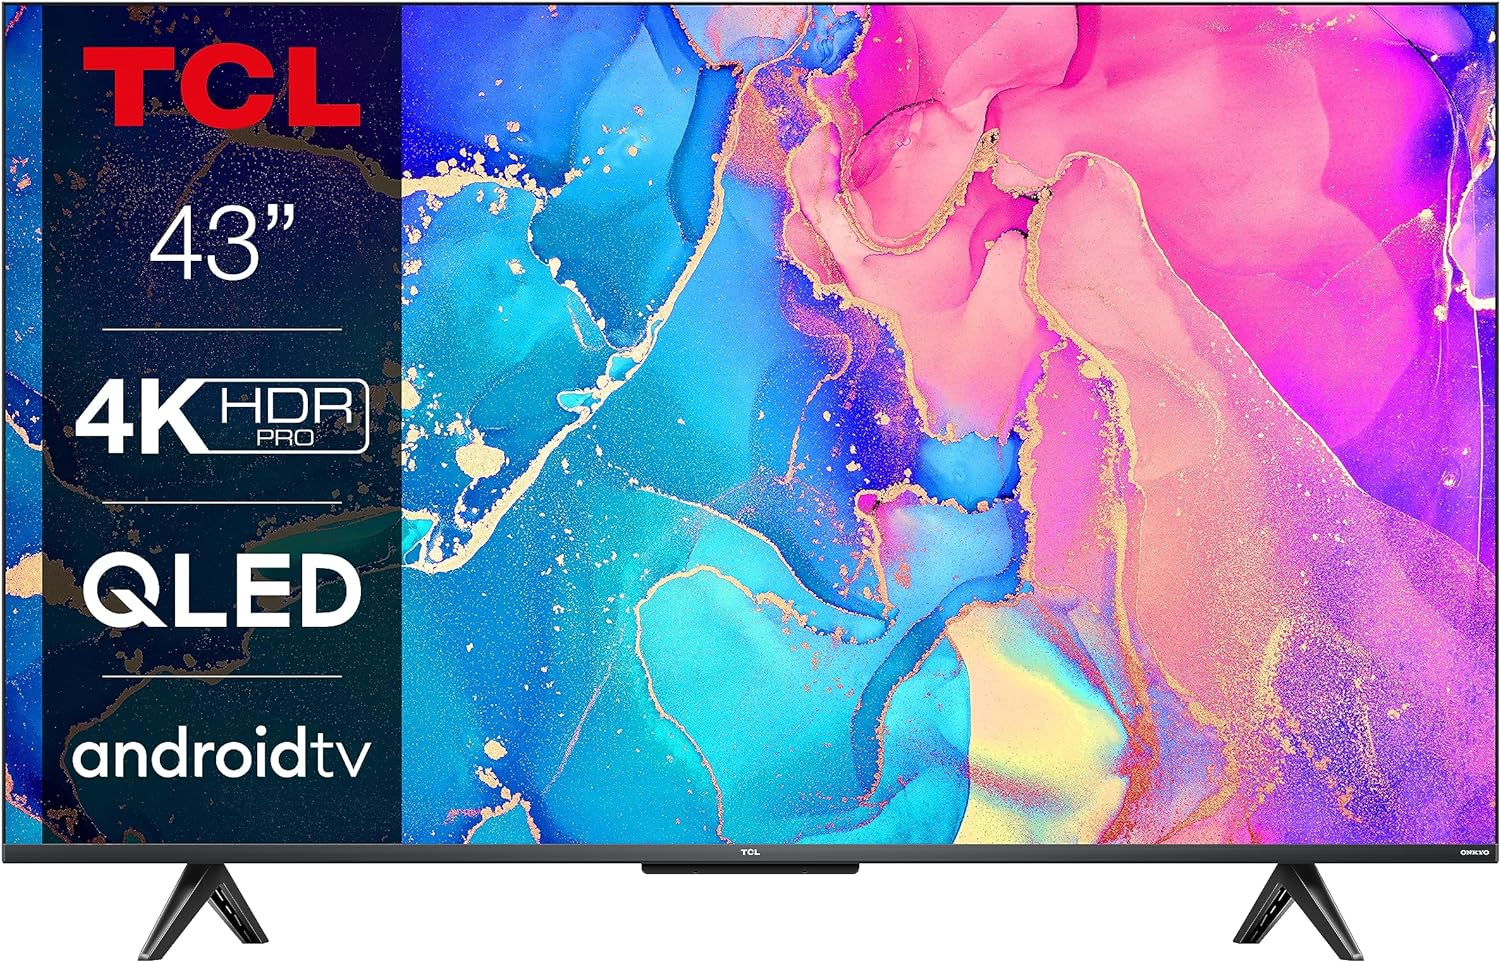 TCL 50C641K 50 - inch QLED Television, 4K Ultra HD, Android Smart TV (Game master, Dolby Atmos, Freeview Play, Motion clarity, Hands - Free Voice Control, compatible with Google assistant & Alexa) - Amazing Gadgets Outlet